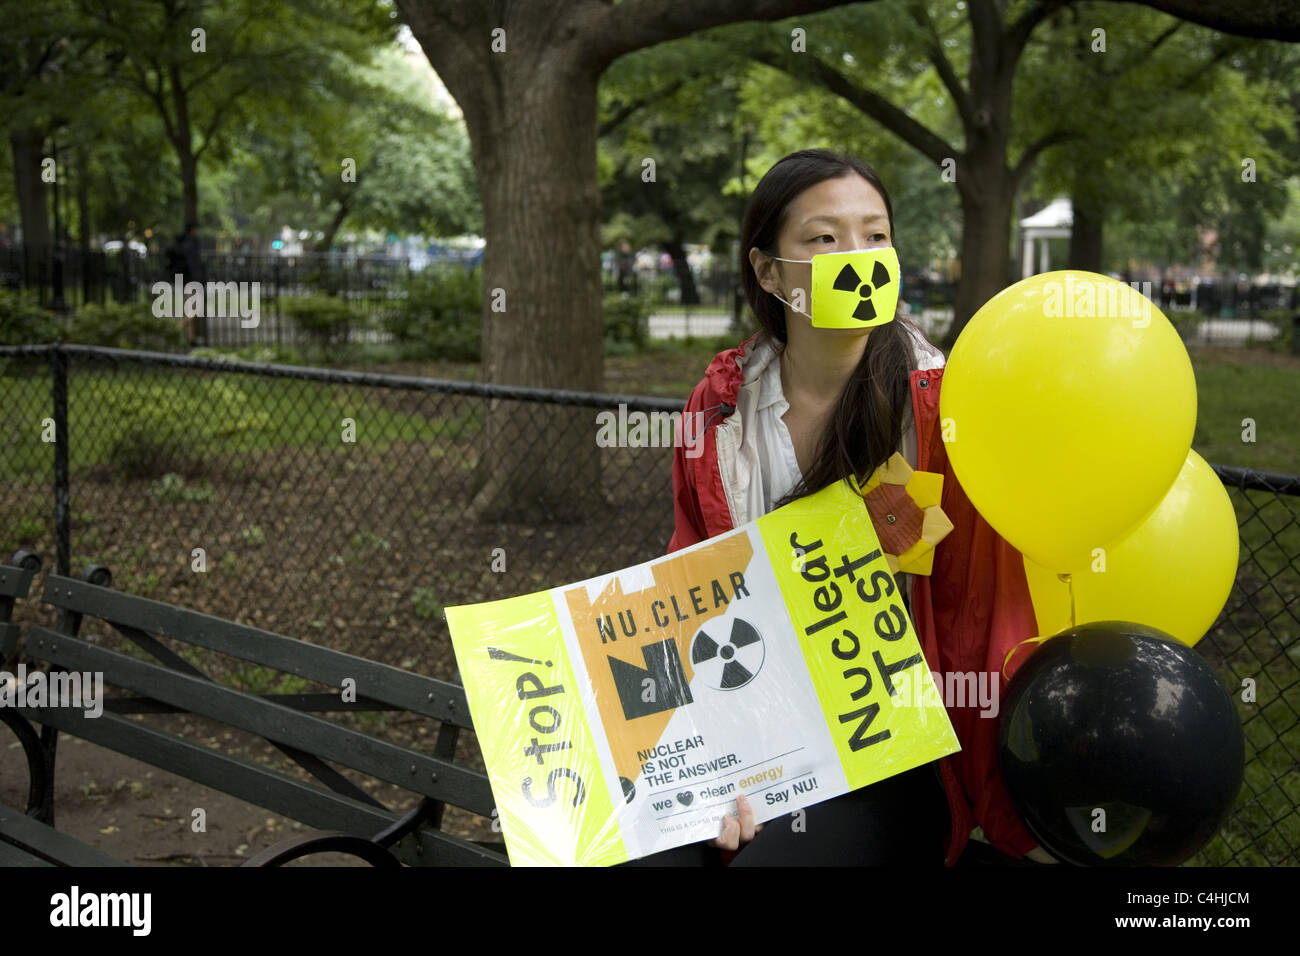 Antinuclear activists rally and march on the 3 month anniversary of the nuclear disaster at Fukushima, Japan. New York City Stock Photo